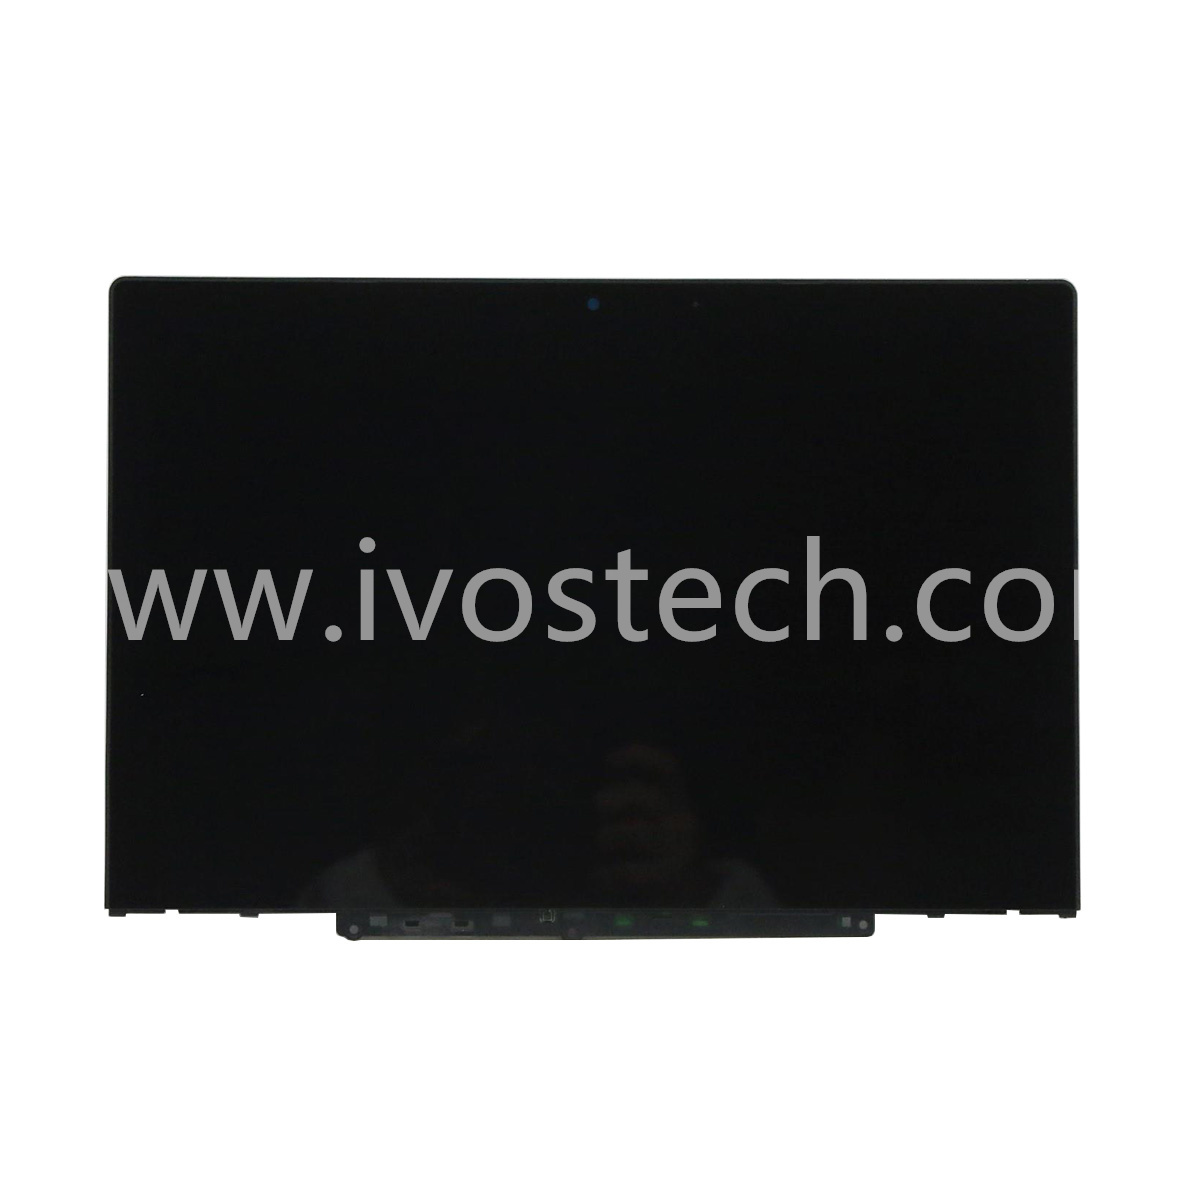 5D10T79593 11.6” HD Laptop LCD Touch Screen Display with Bezel Assembly for Lenovo Chromebook 11 500e 2nd Gen 81MC